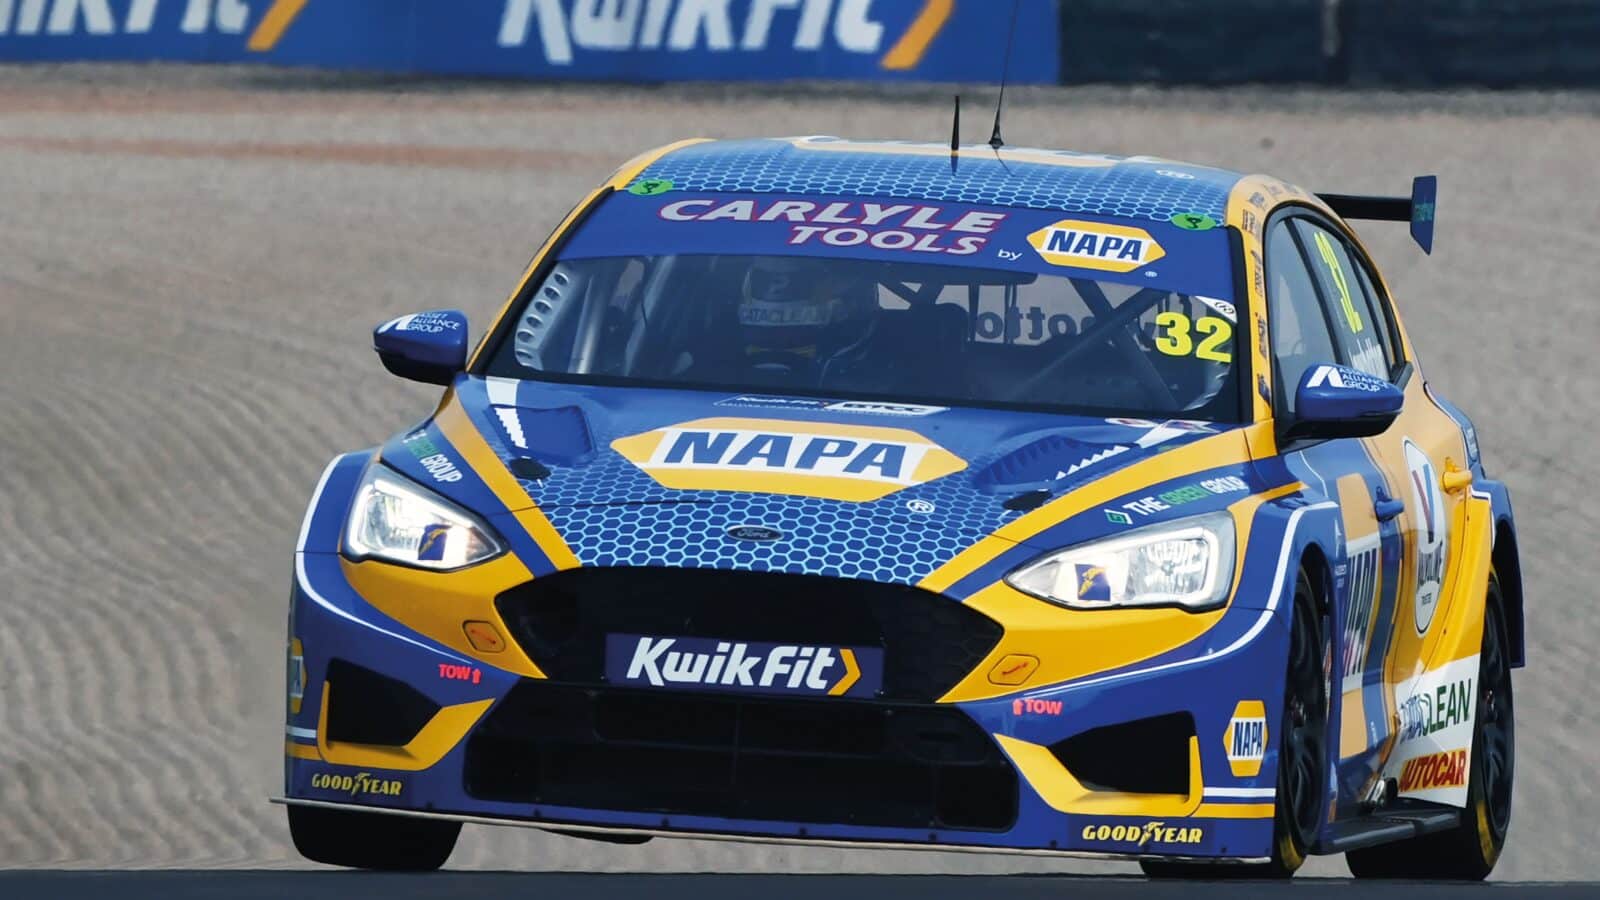 Rowbottom in the Napa Racing Ford Focus in the modern BTCC